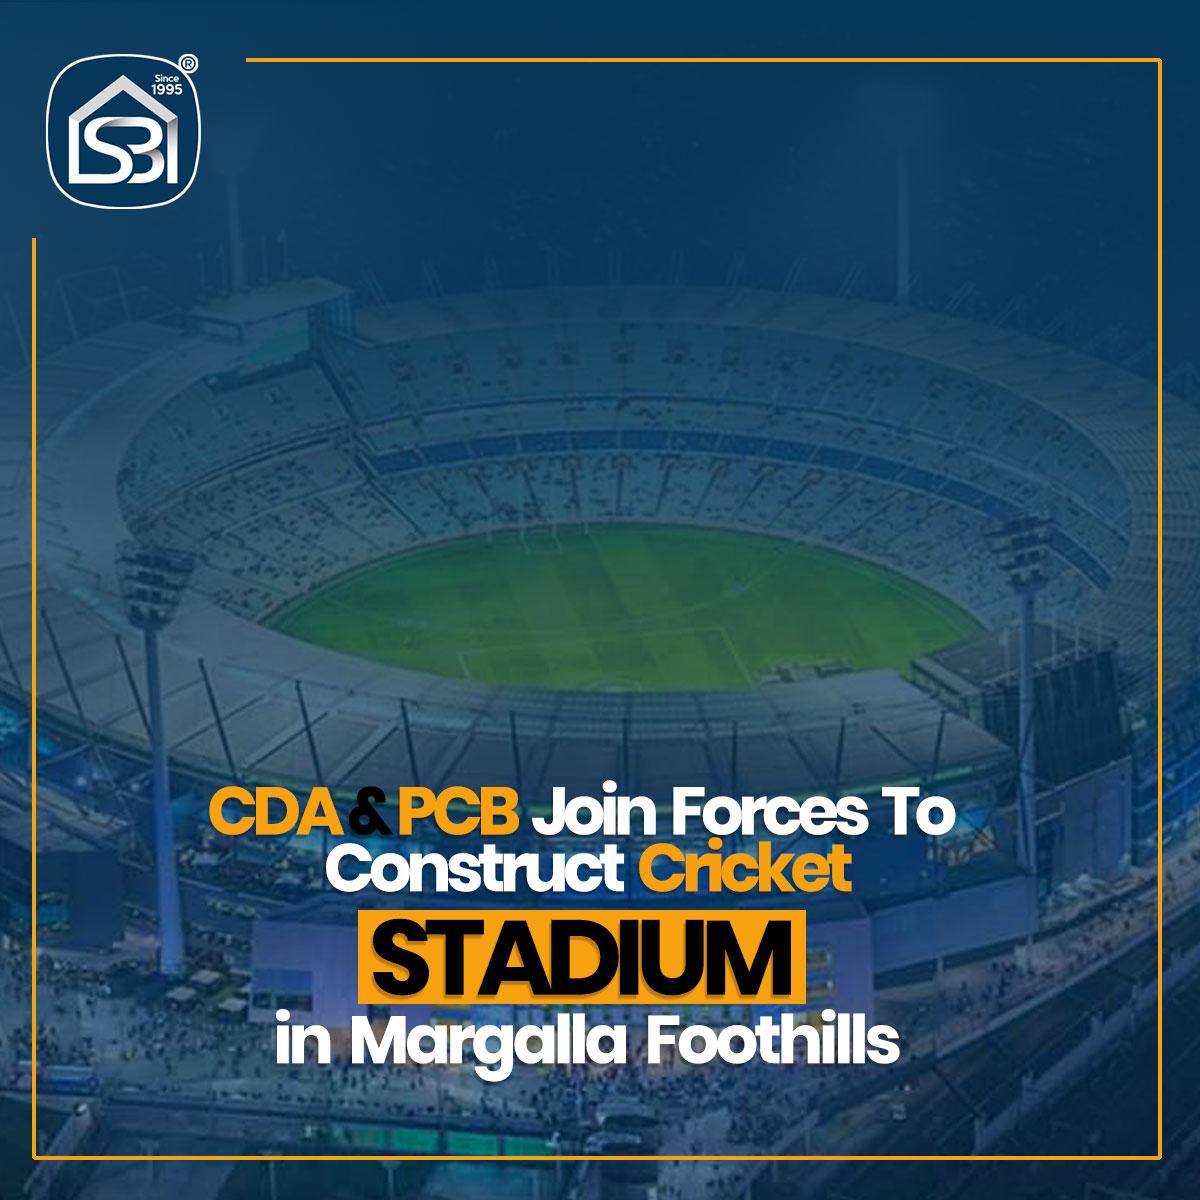 CDA & PCB To Construct Cricket Stadium In Margalla. Read More: syed-brothers.com/news/cda-pcb-t…
.
.
.
#syedbrothers #constructioncompany #homebuilding #architectureanddesign #homedecorideas #realestateinvesting #NewsUpdate #cricket #stadium